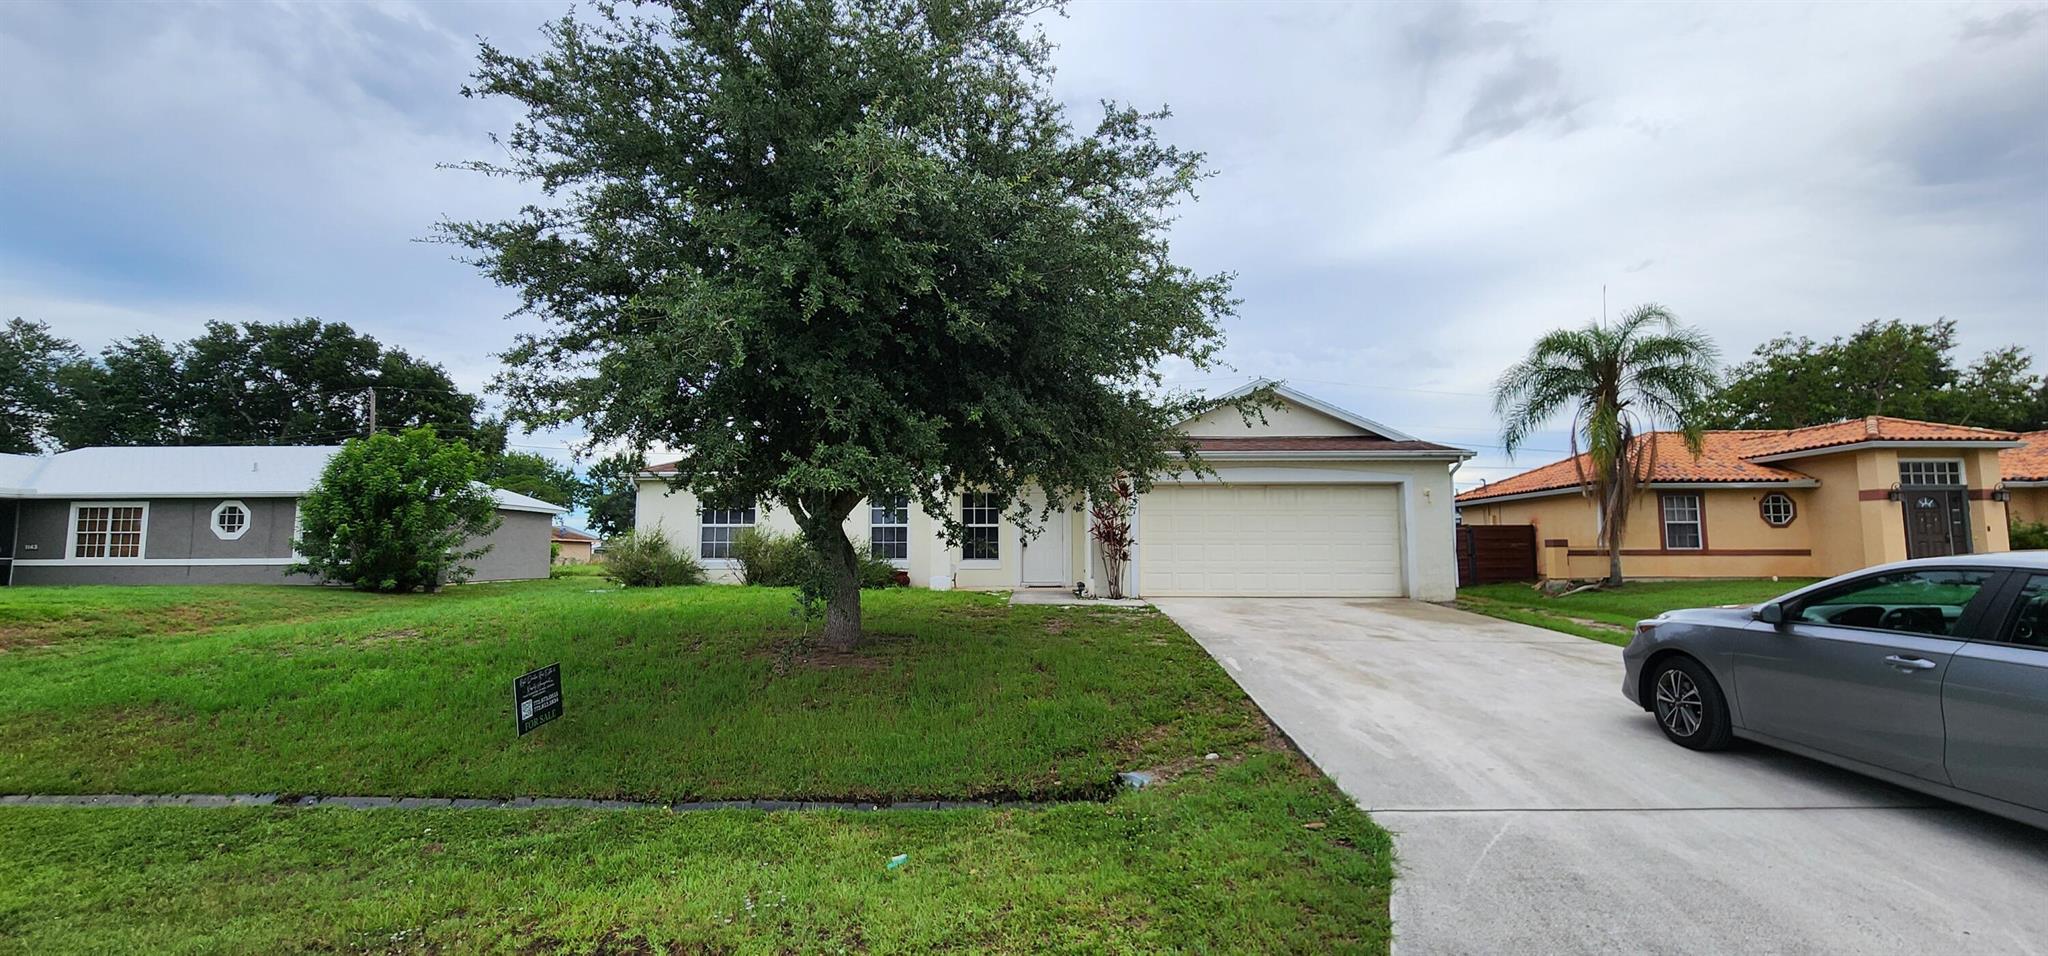 View Port St Lucie, FL 34953 house